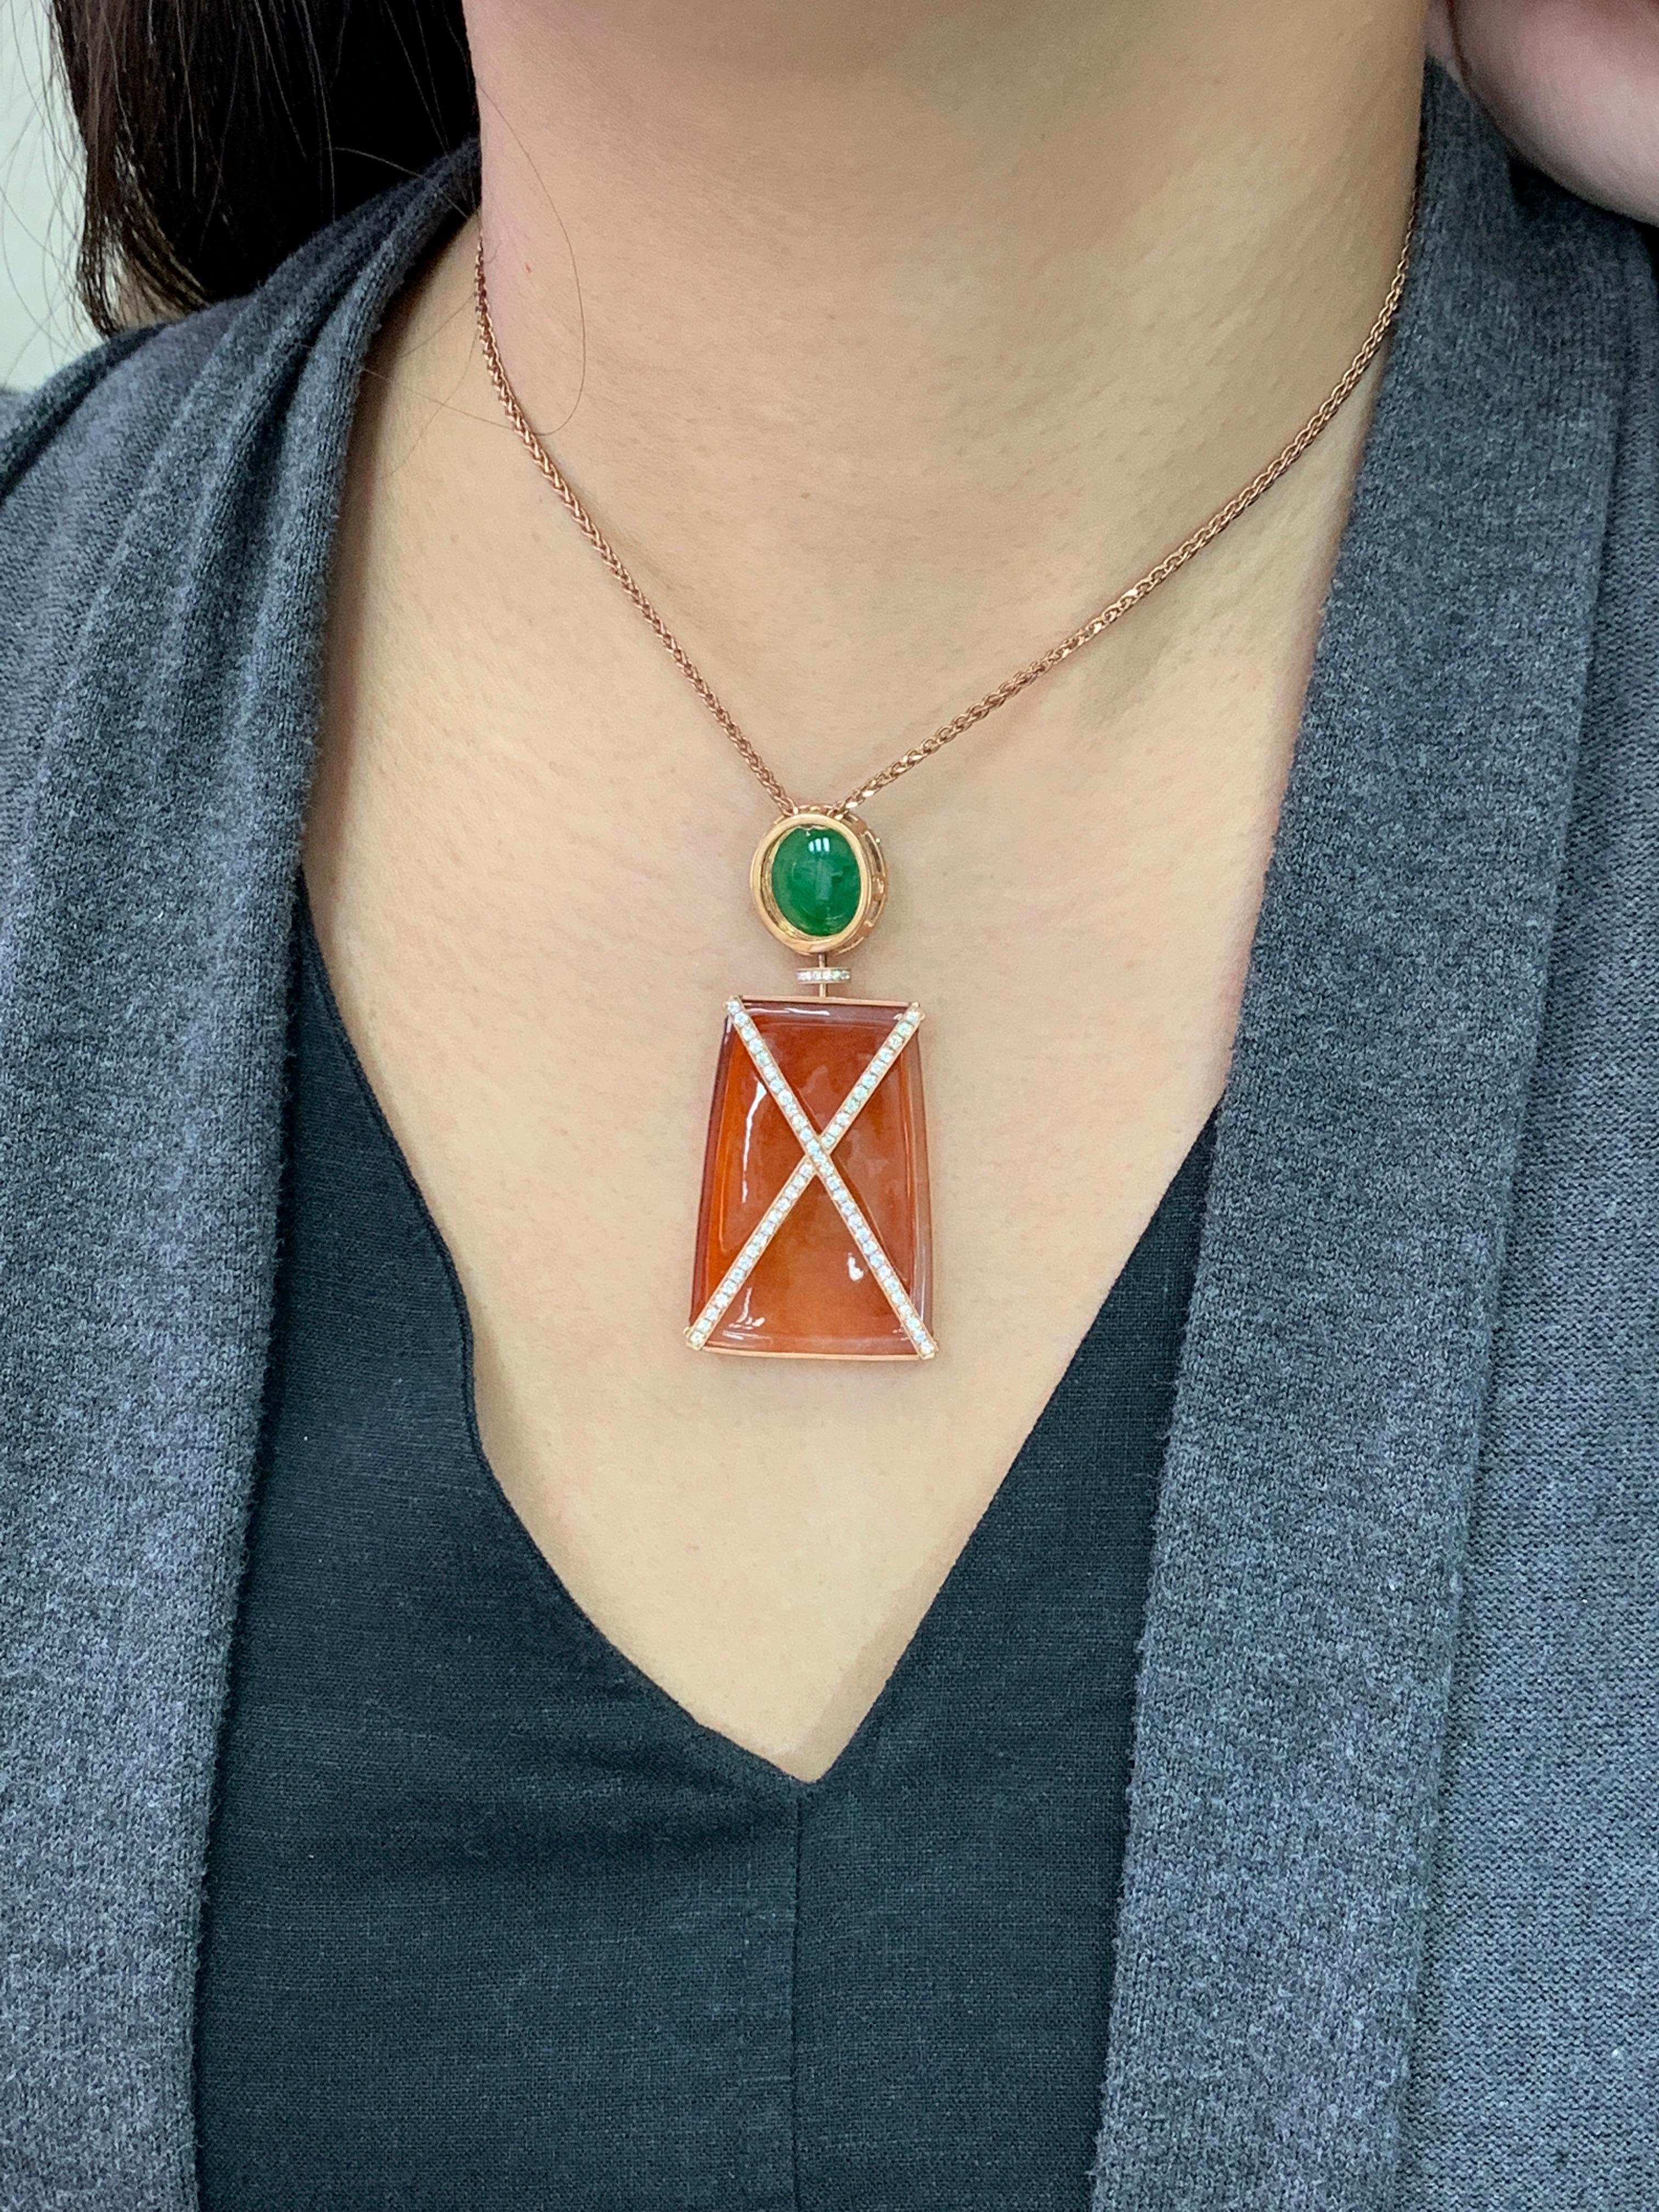 Please check out the HD video! Red jade of this quality is very rare. A very unique design that is reversible. This gives the wearer a different look from front to back. Here is a nice Jade pendant made with an eye catching brown (almost red)